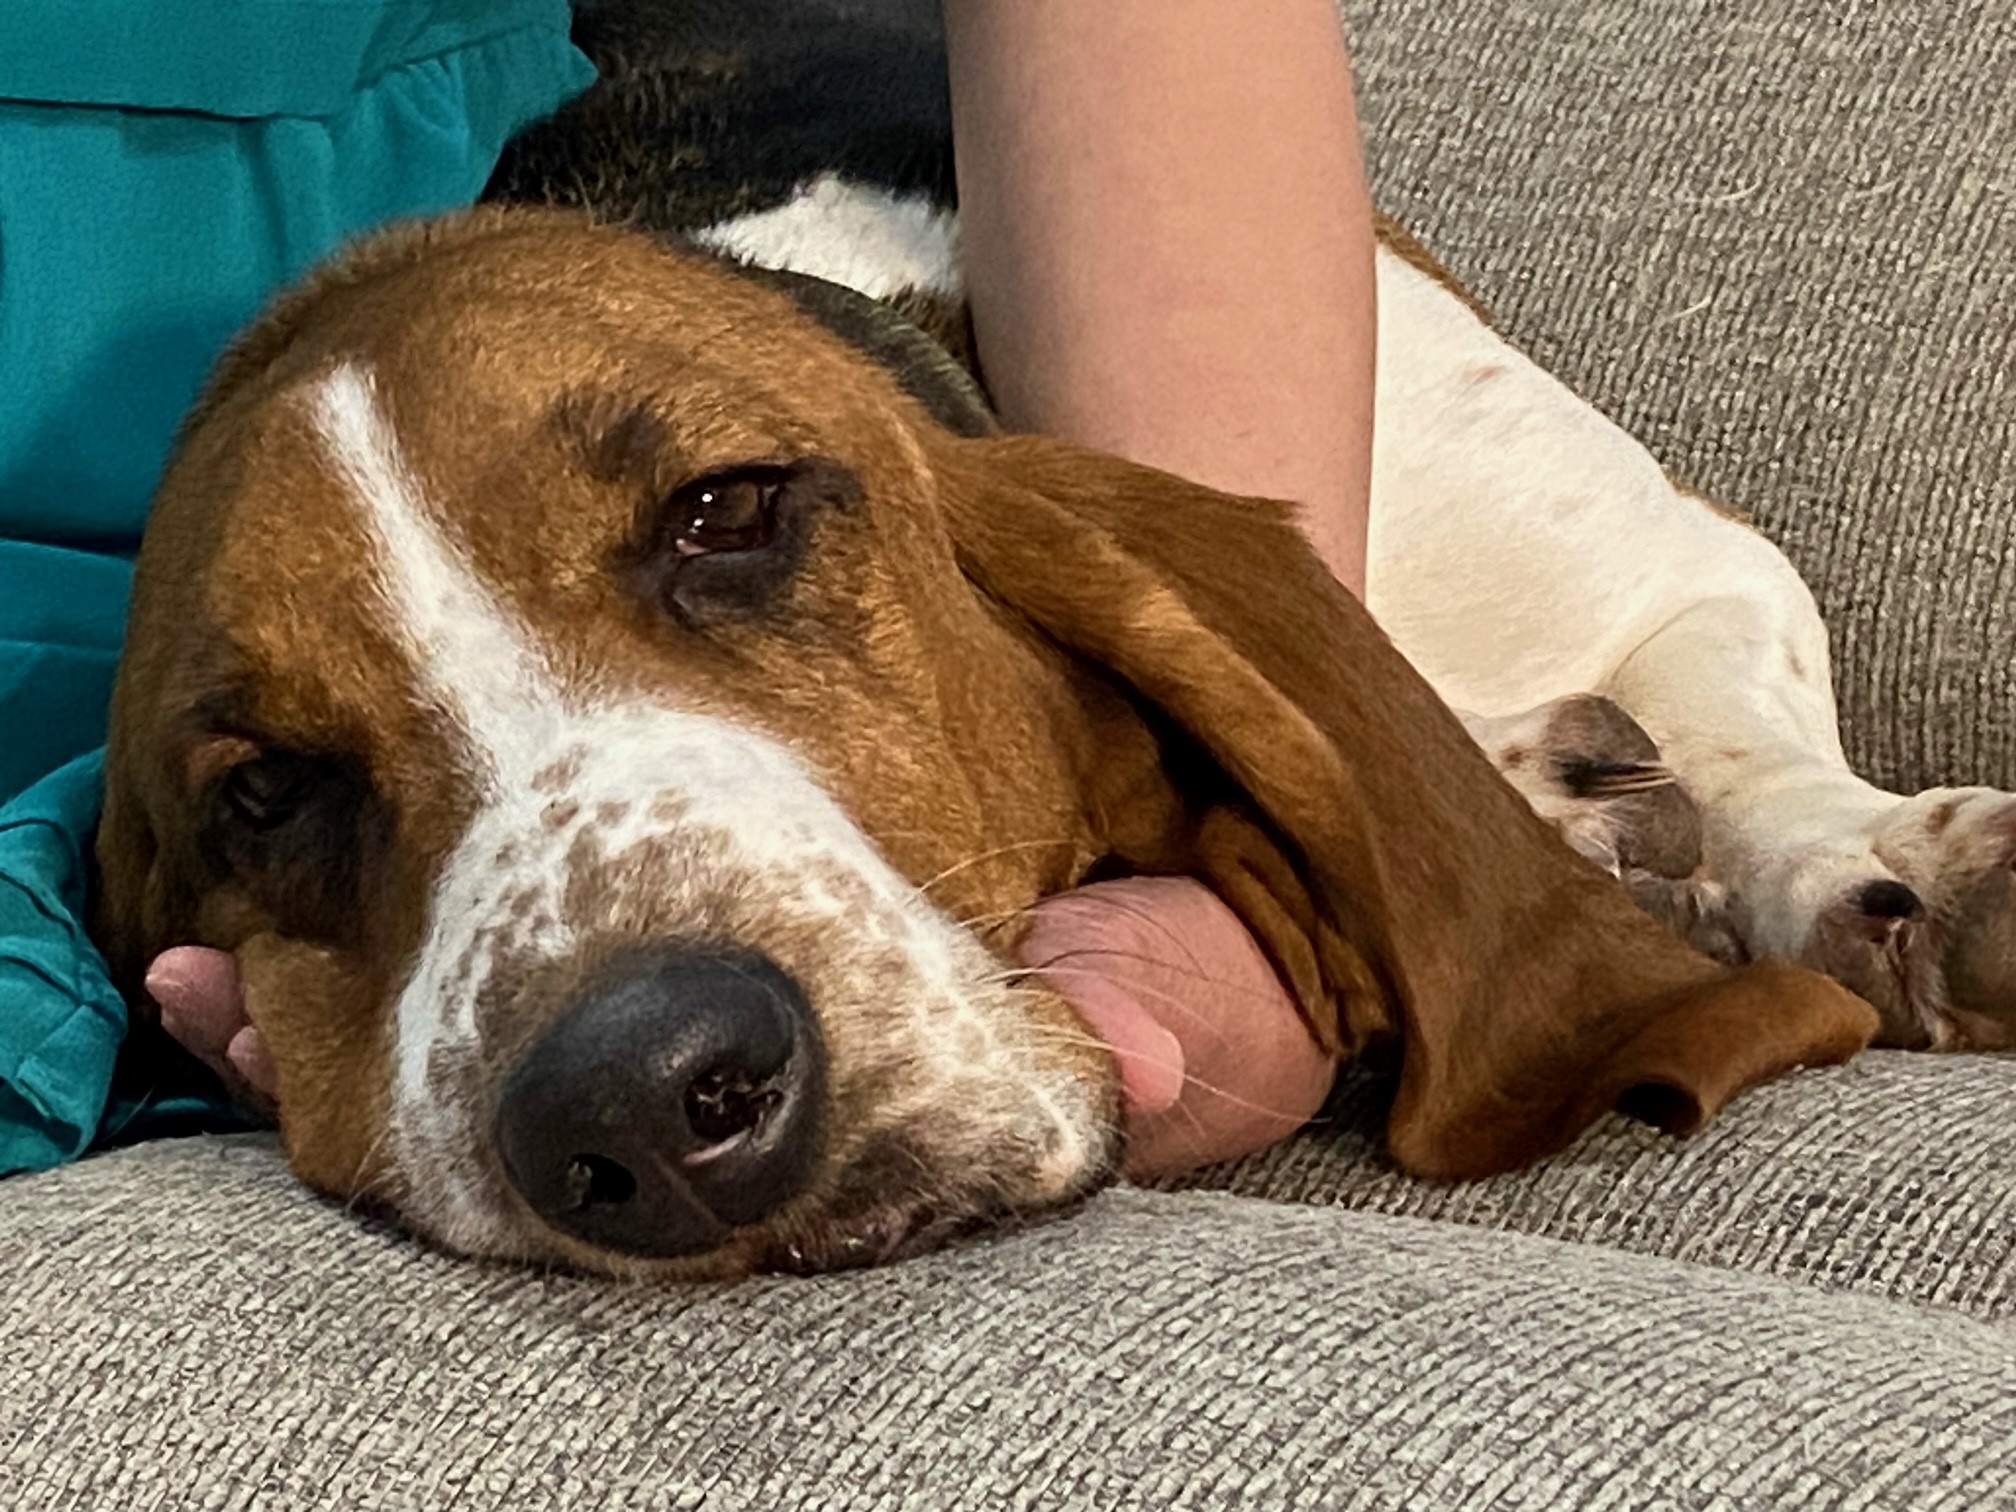 Alberta basset hound survives 7 days in bitter cold: ‘Nothing short of a miracle’